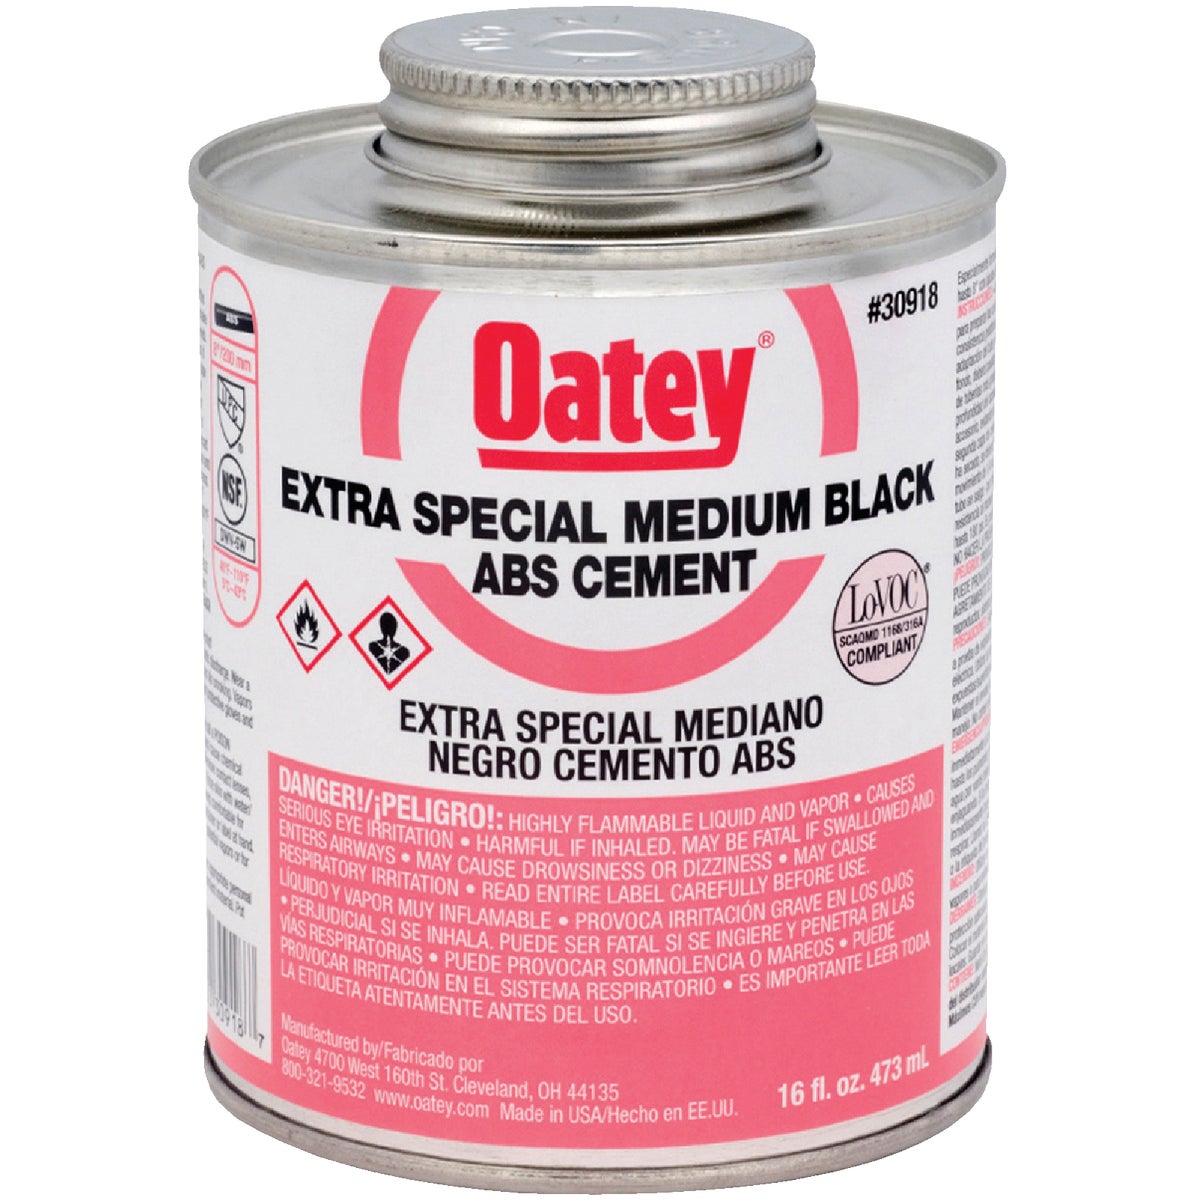 Oatey 16 Oz. Medium Bodied Black Extra Special ABS Cement